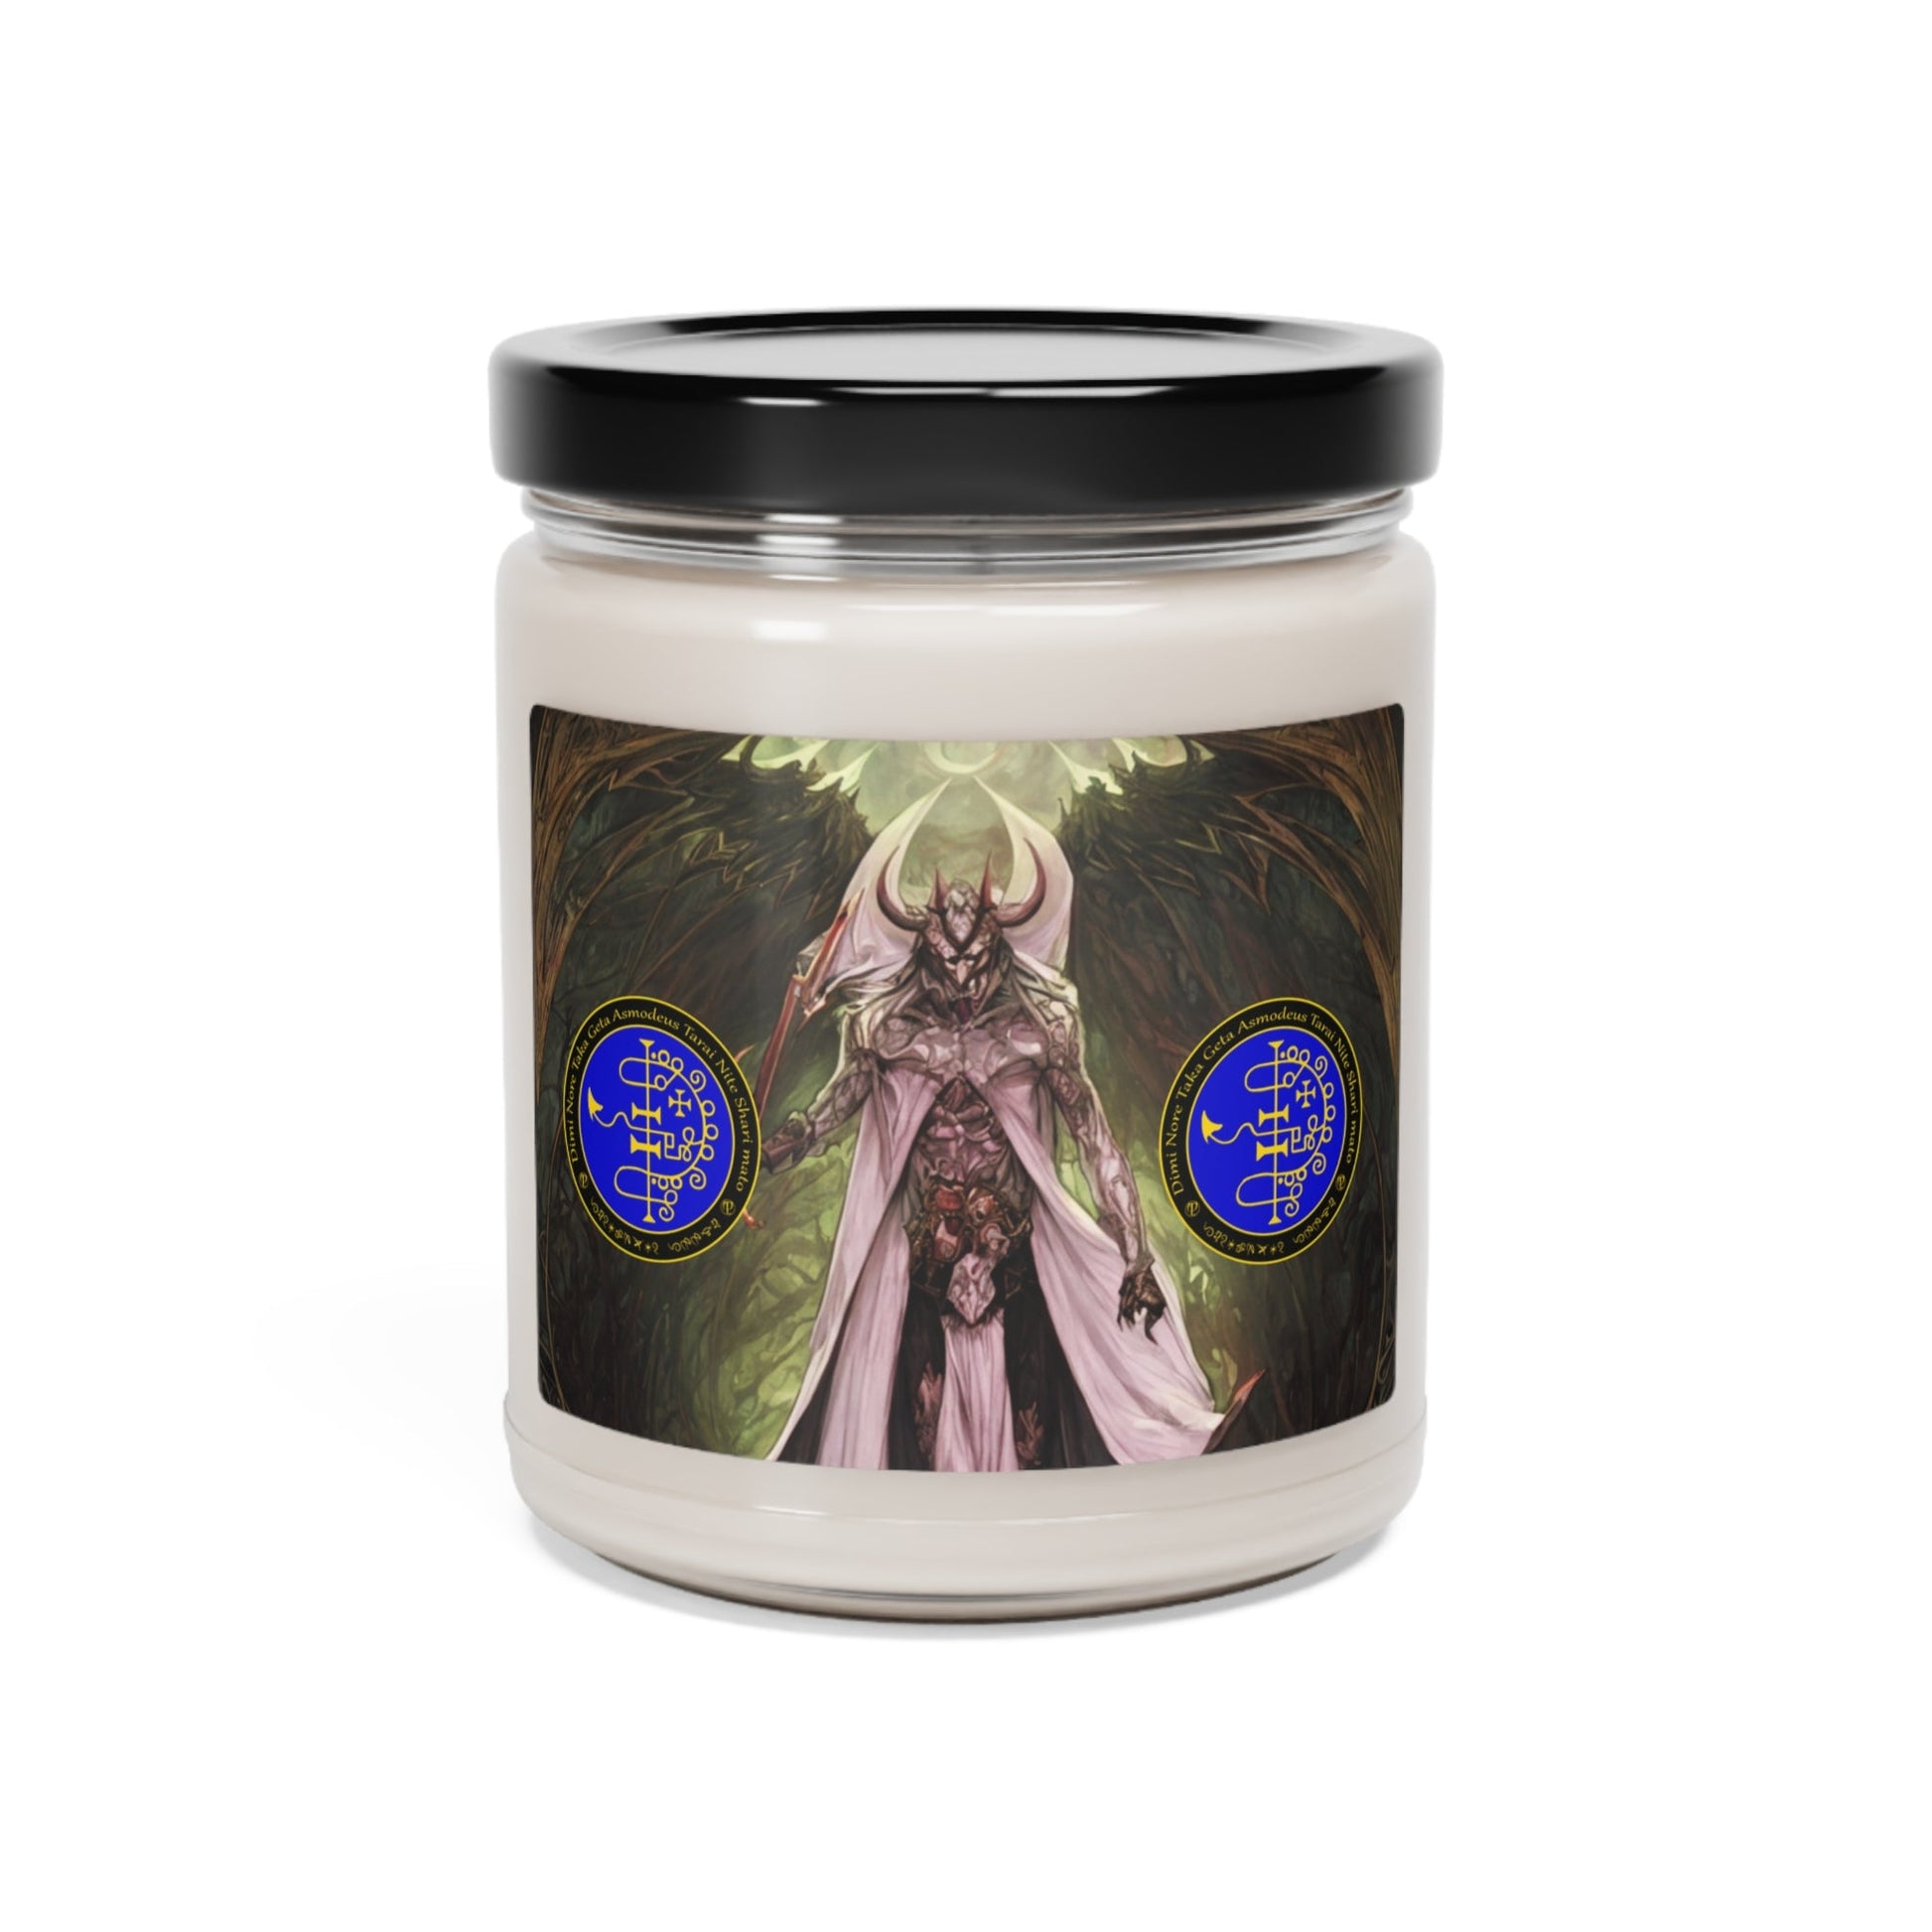 Demon-Asmodeus-Altar-Scented-Soy-Candle-for-Gambling-related-offerings-rituals-initiations-or-praying-and-meditation-16